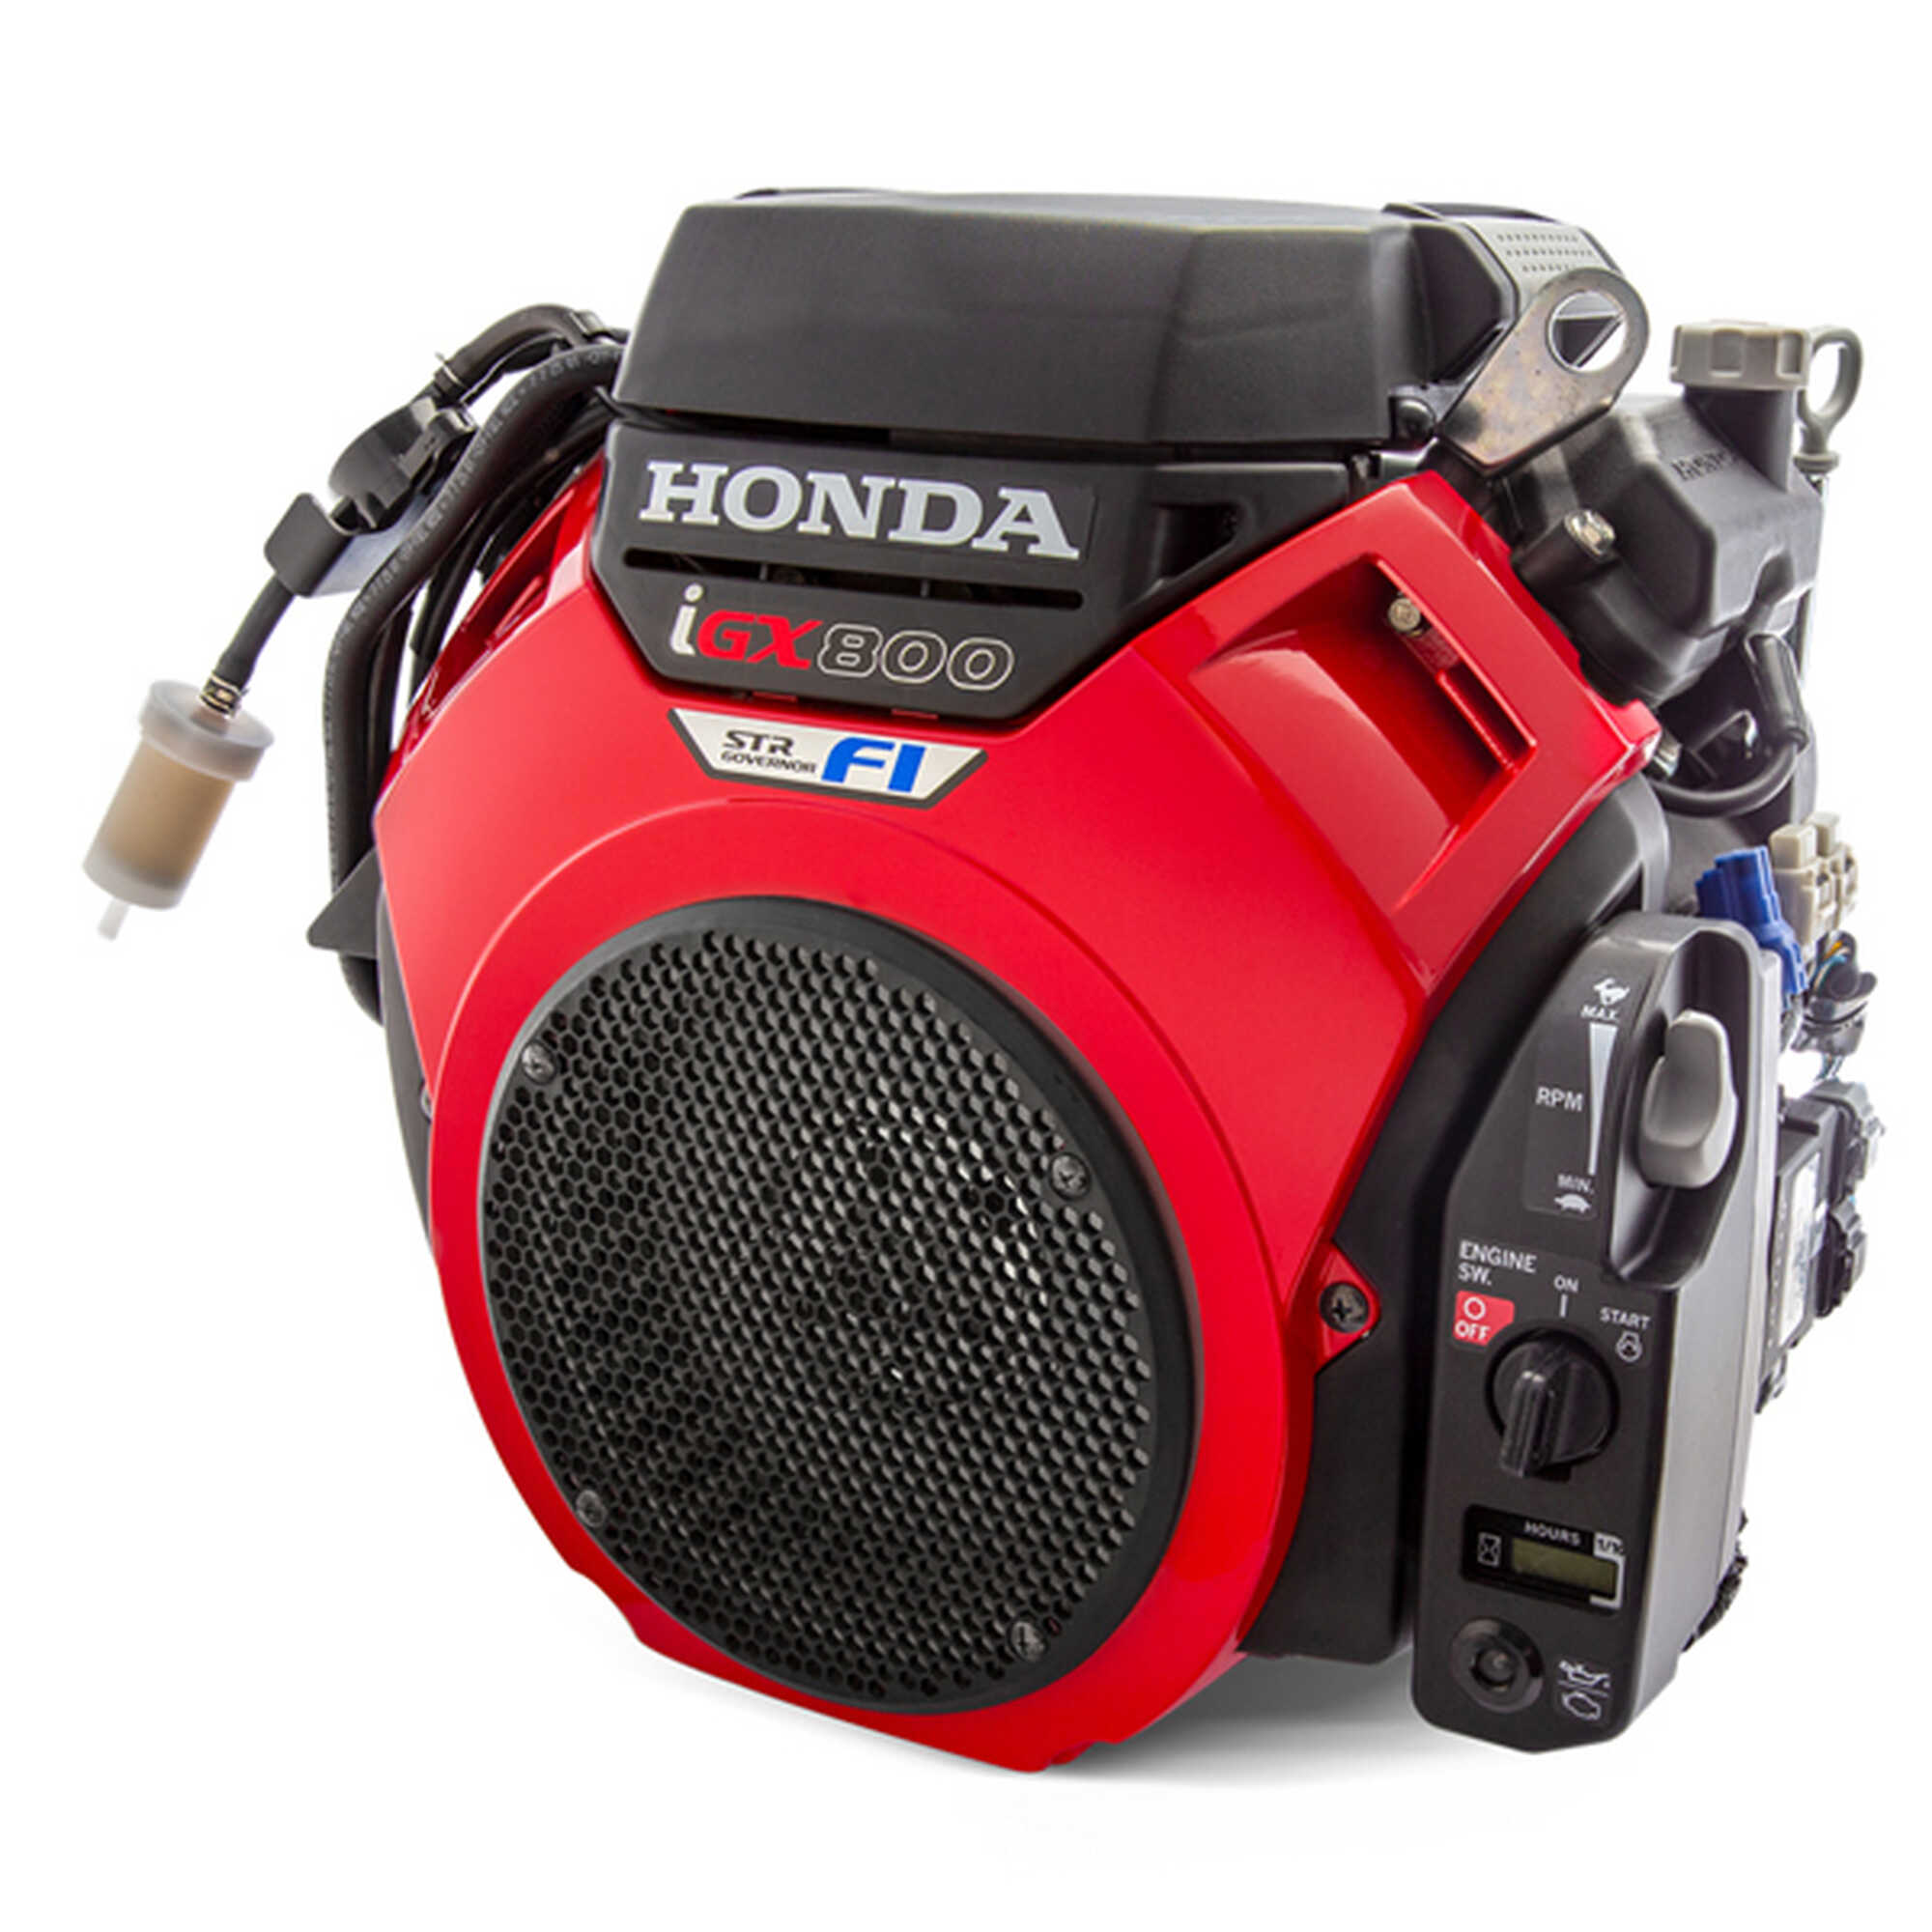 Honda’s V-Twin Model Line-up Expands with two EFI models ... When Reliability meets Intelligence